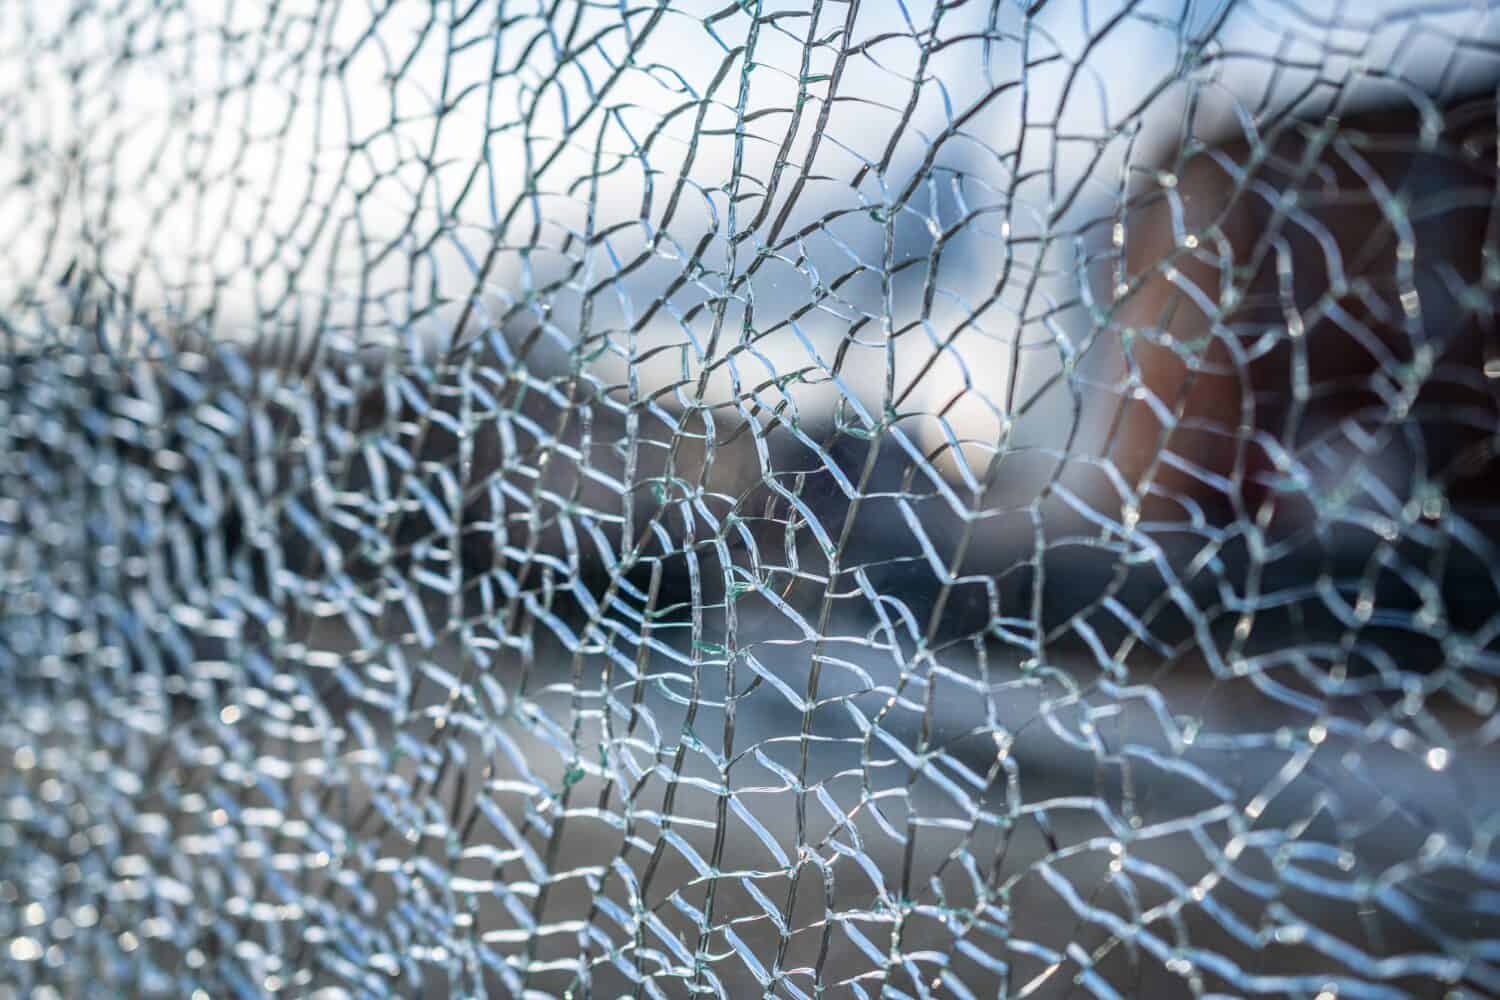 Close up of broken safety glass outside on a port site